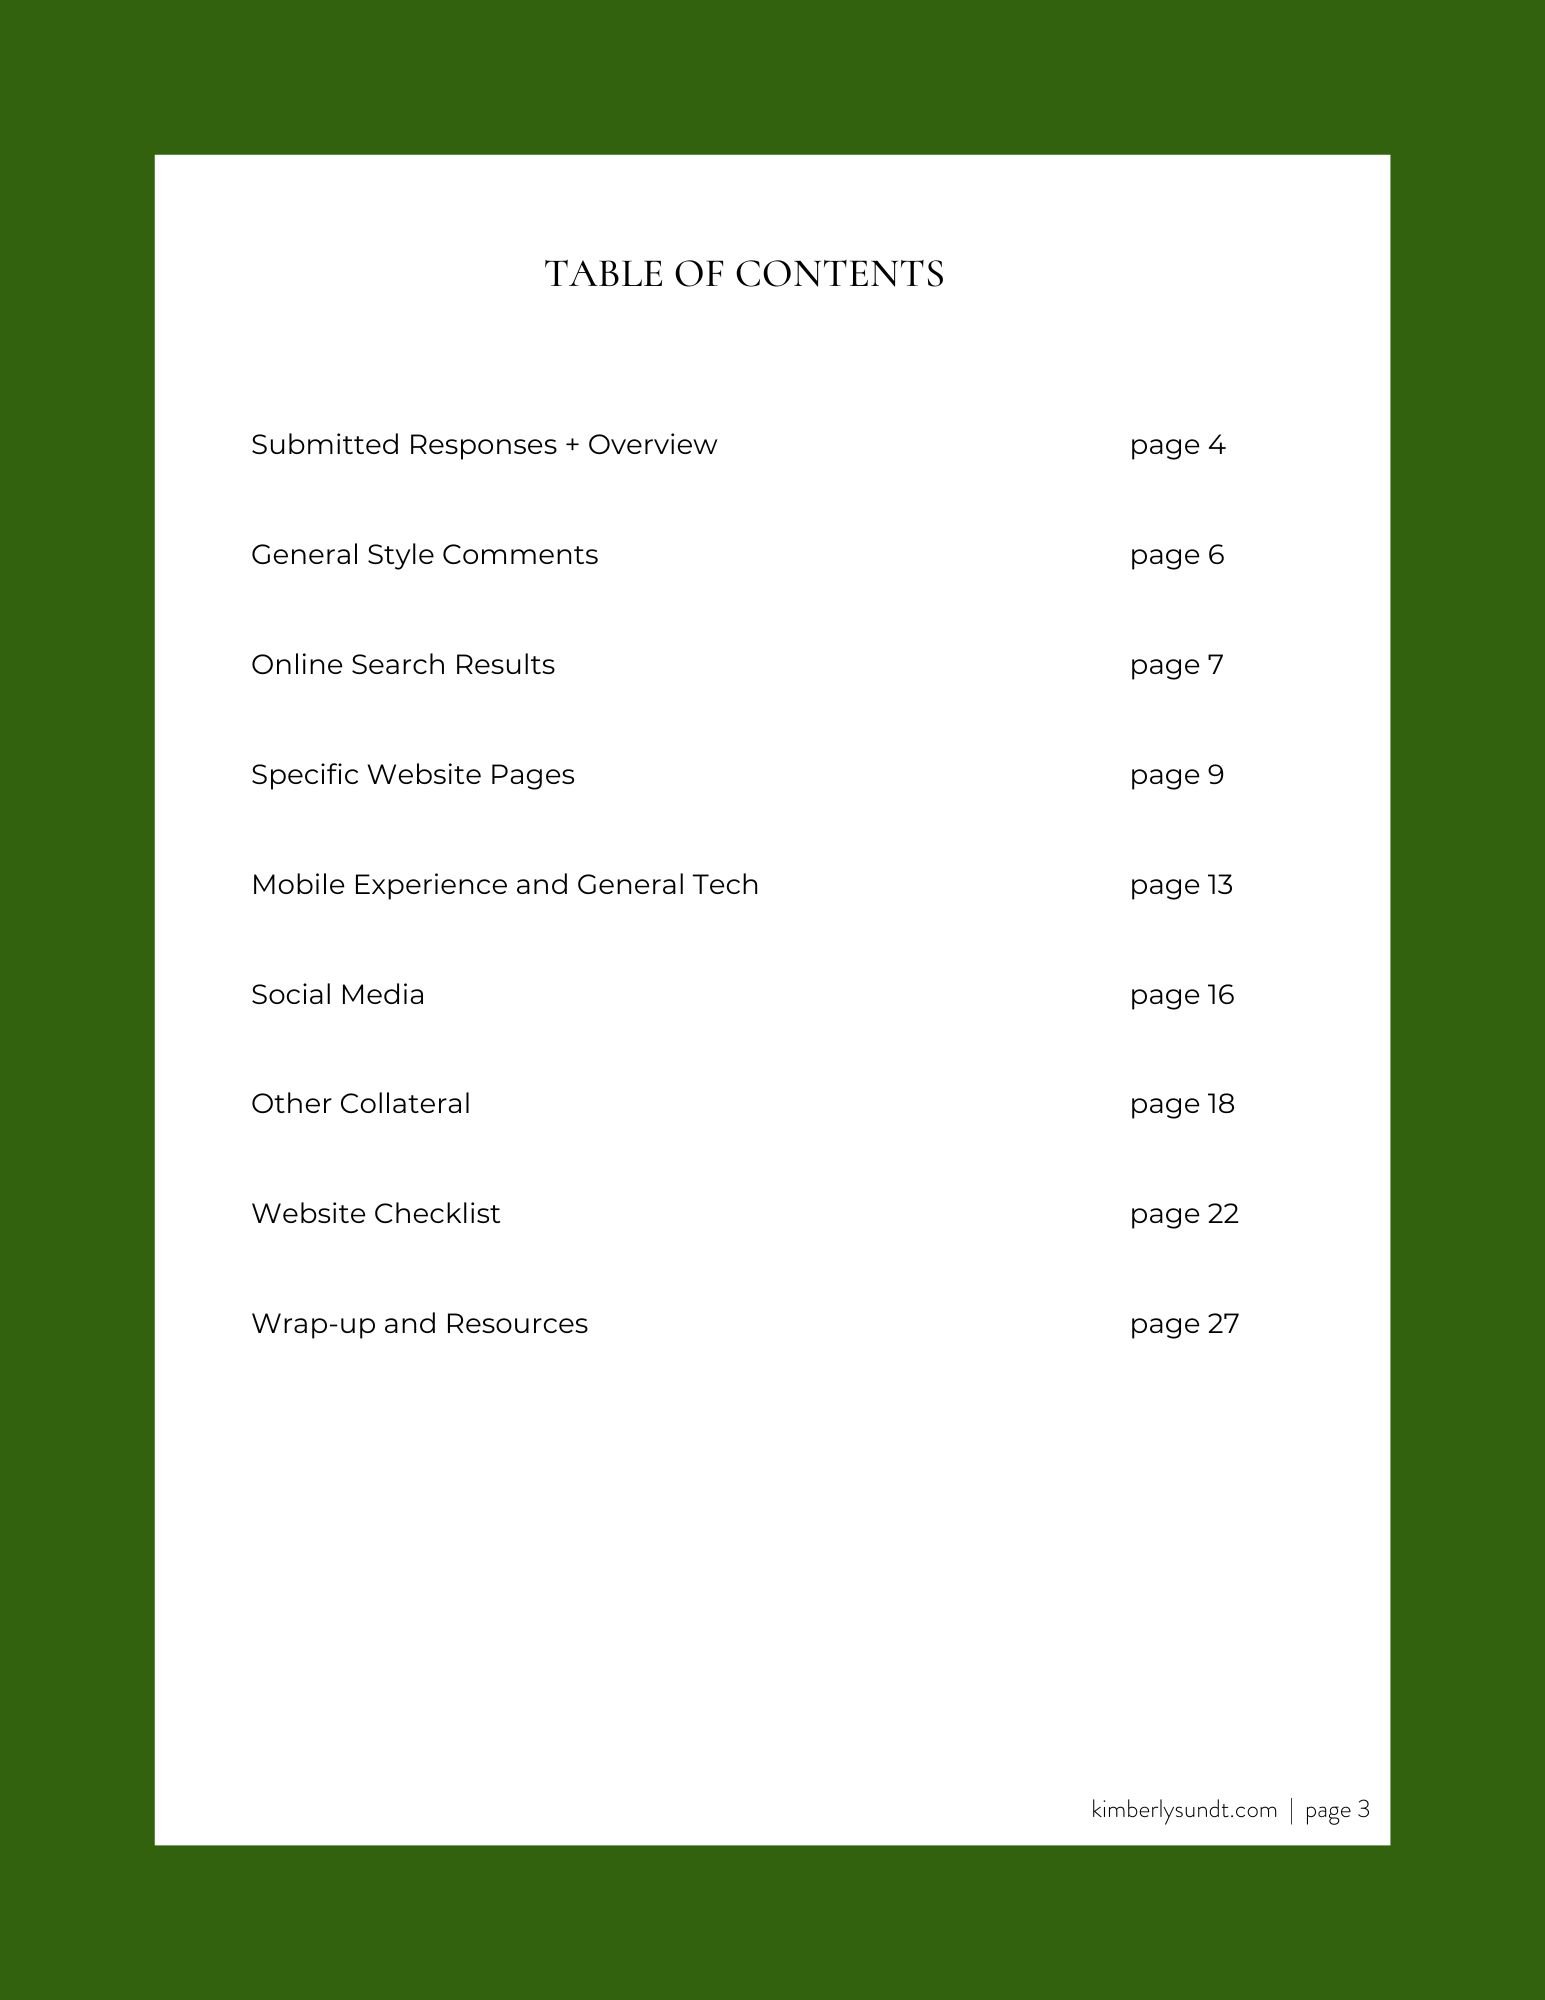 Brand Audit Table of Contents.jpg